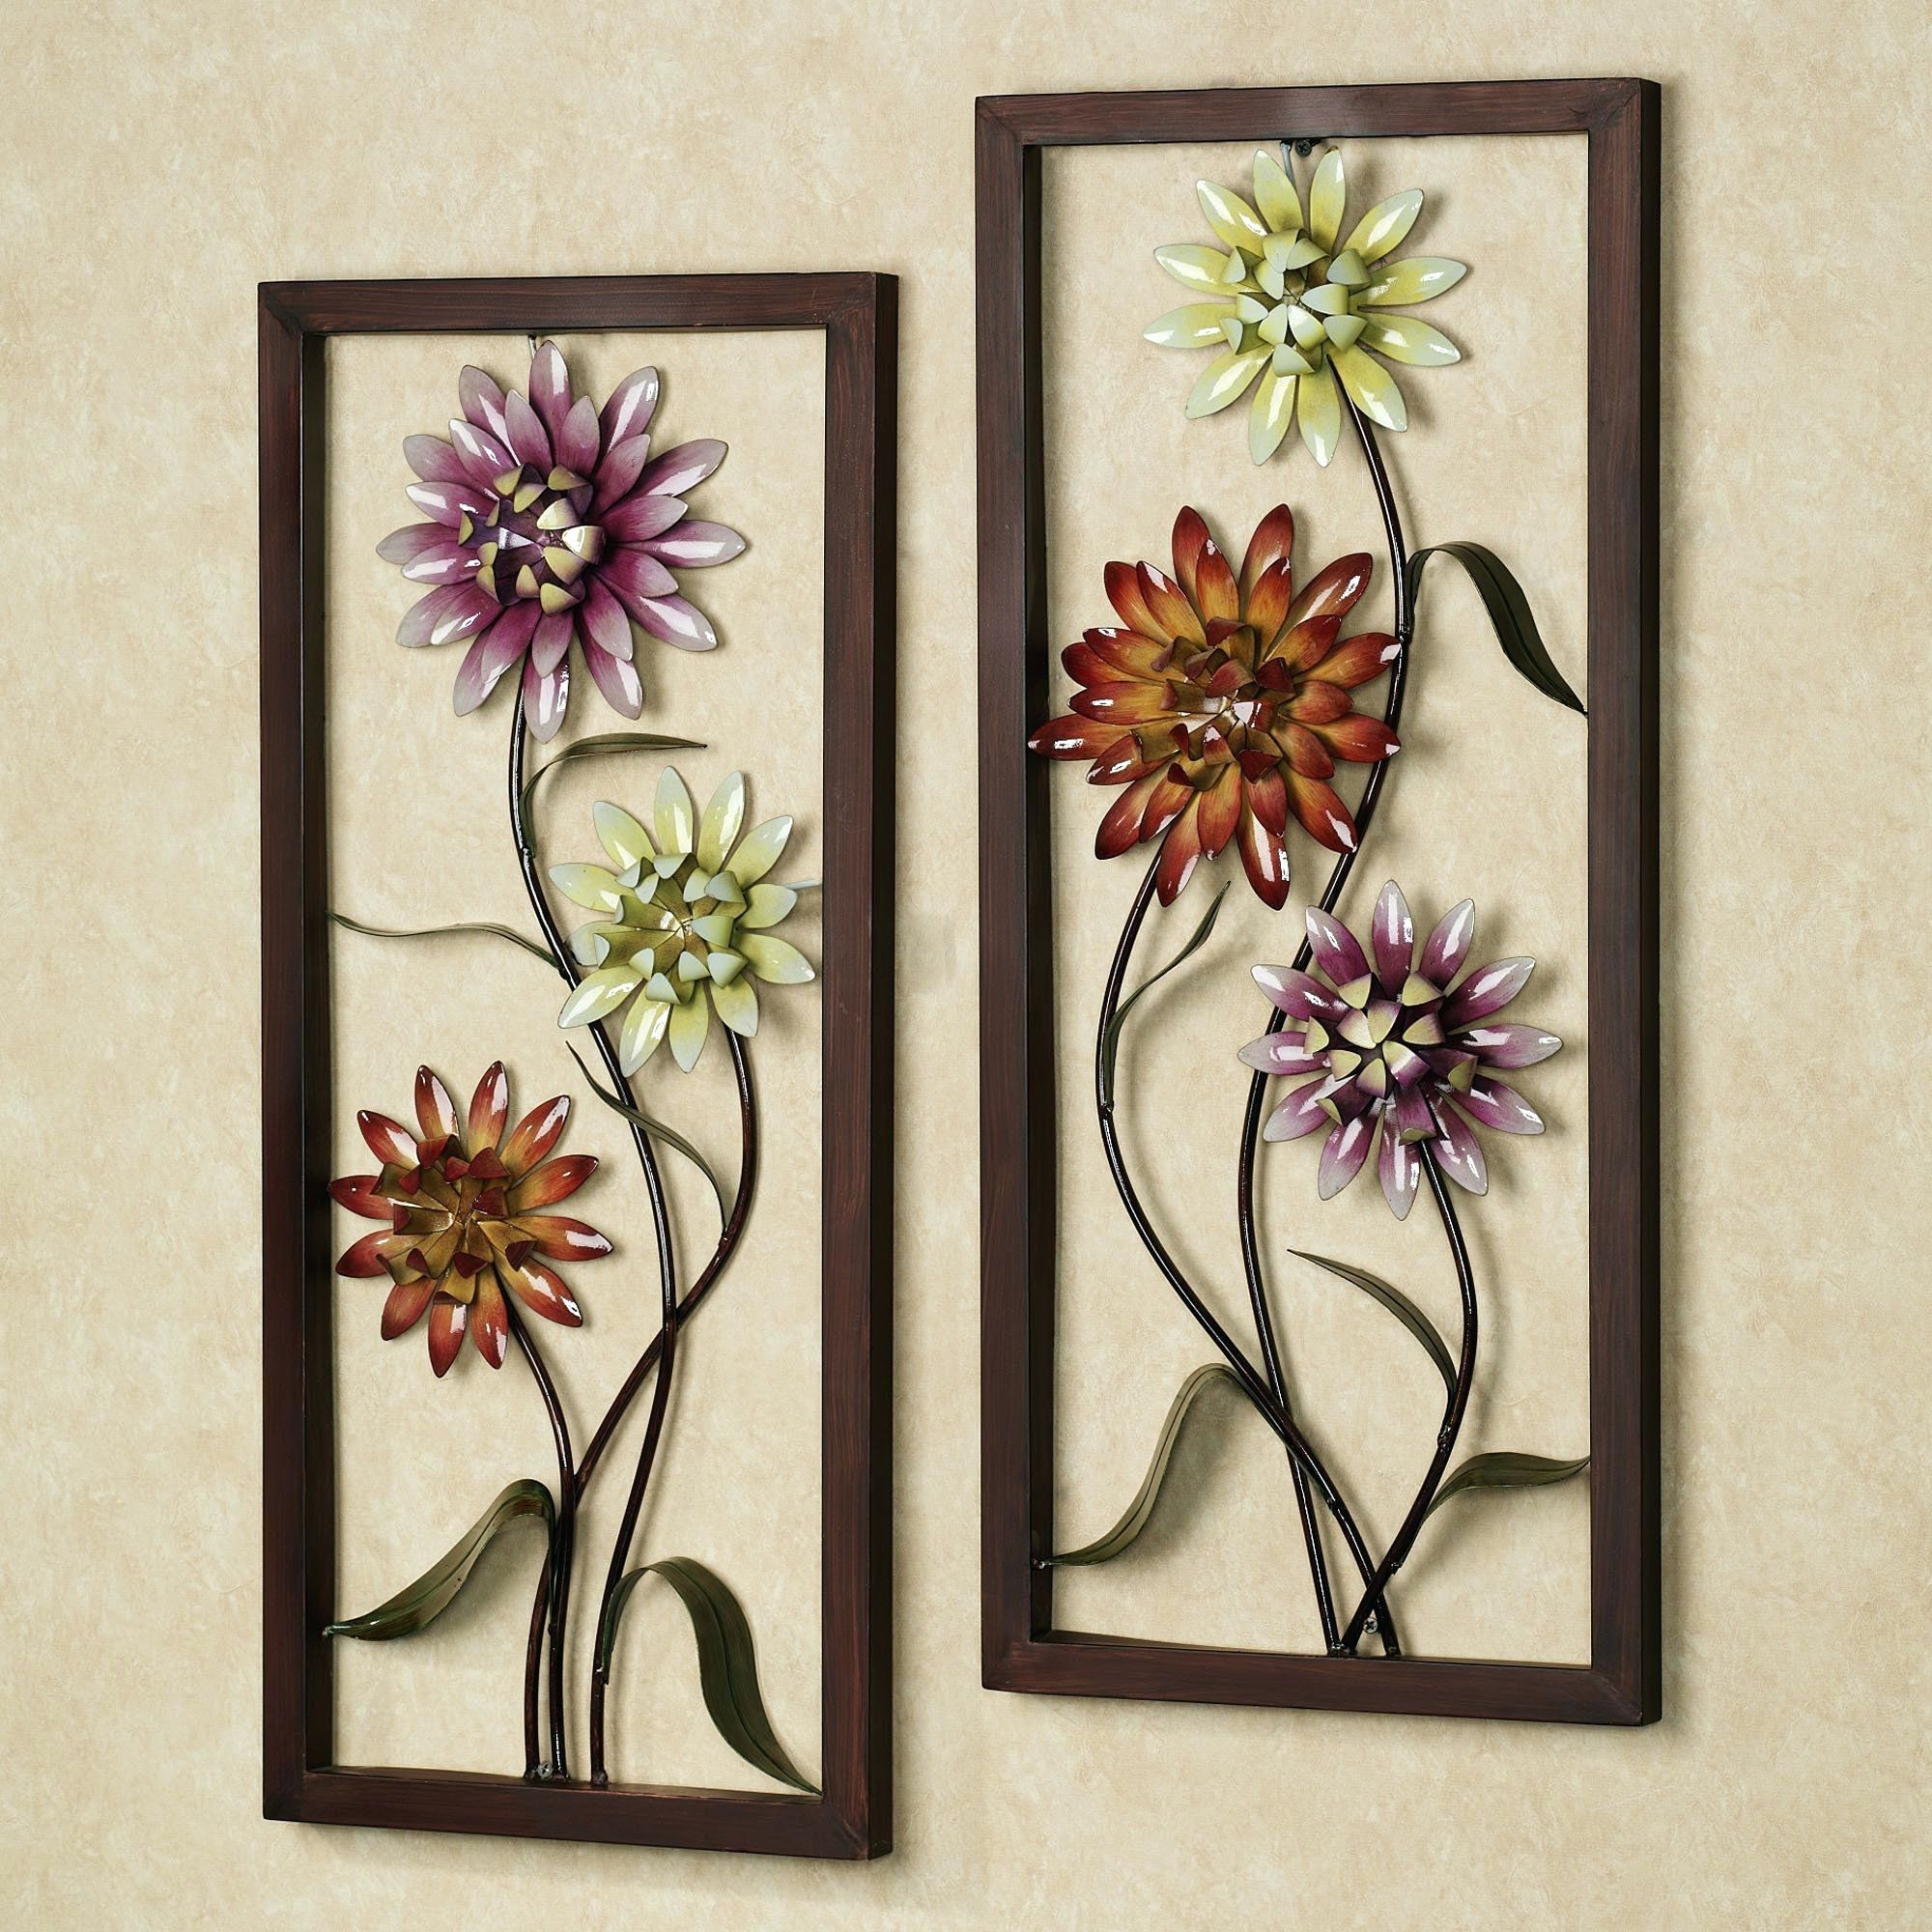 Canvas Wall Art At Hobby Lobby Inside Fashionable Wall Arts ~ Floral Wall Art Pictures Floral Wall Art Prints Pretty (View 13 of 15)